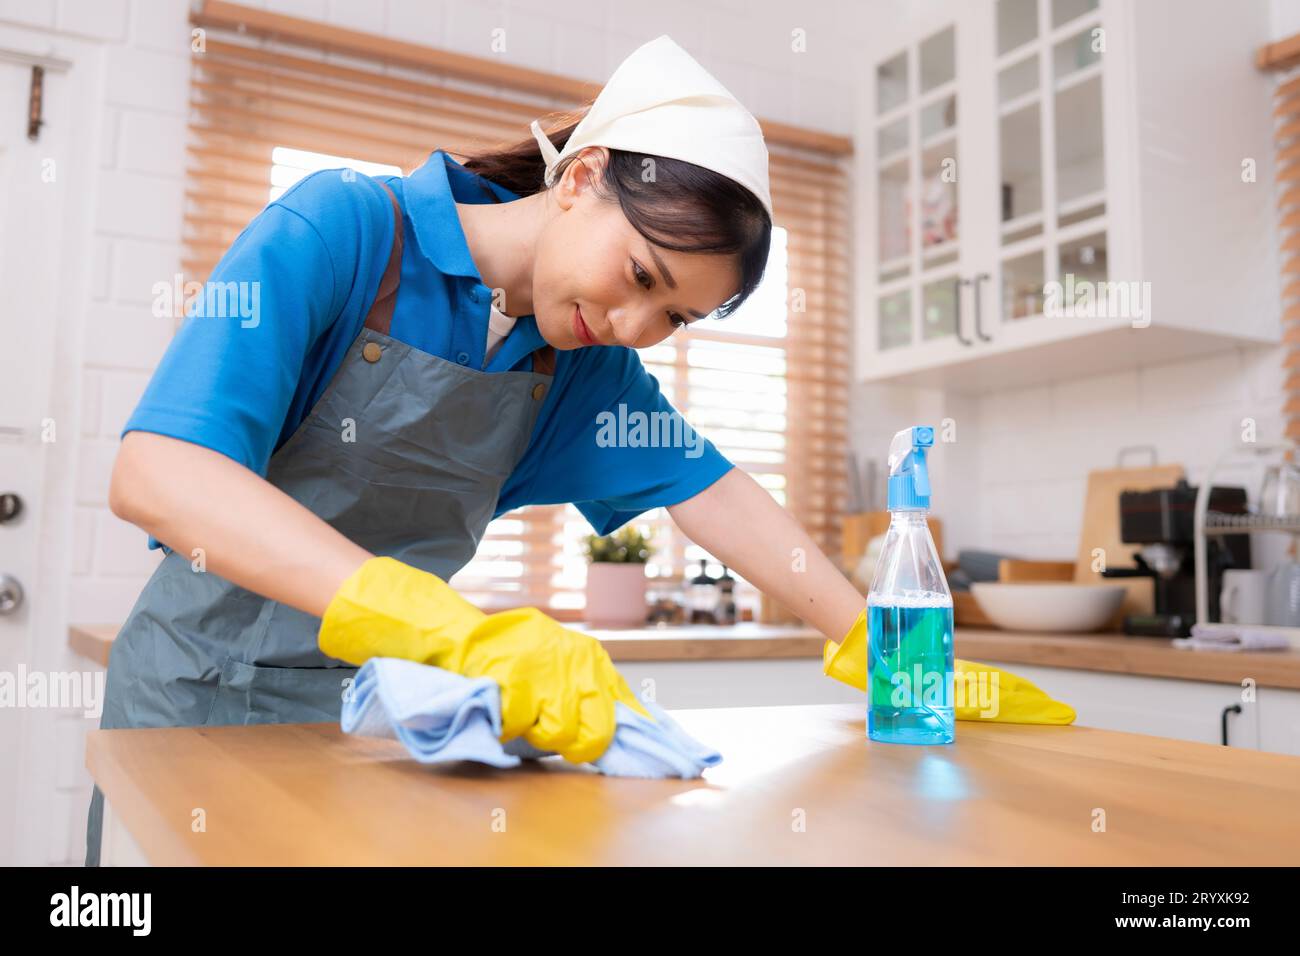 https://c8.alamy.com/comp/2RYXK92/young-woman-cleaning-the-table-in-the-kitchen-housekeeping-and-housekeeping-concept-2RYXK92.jpg